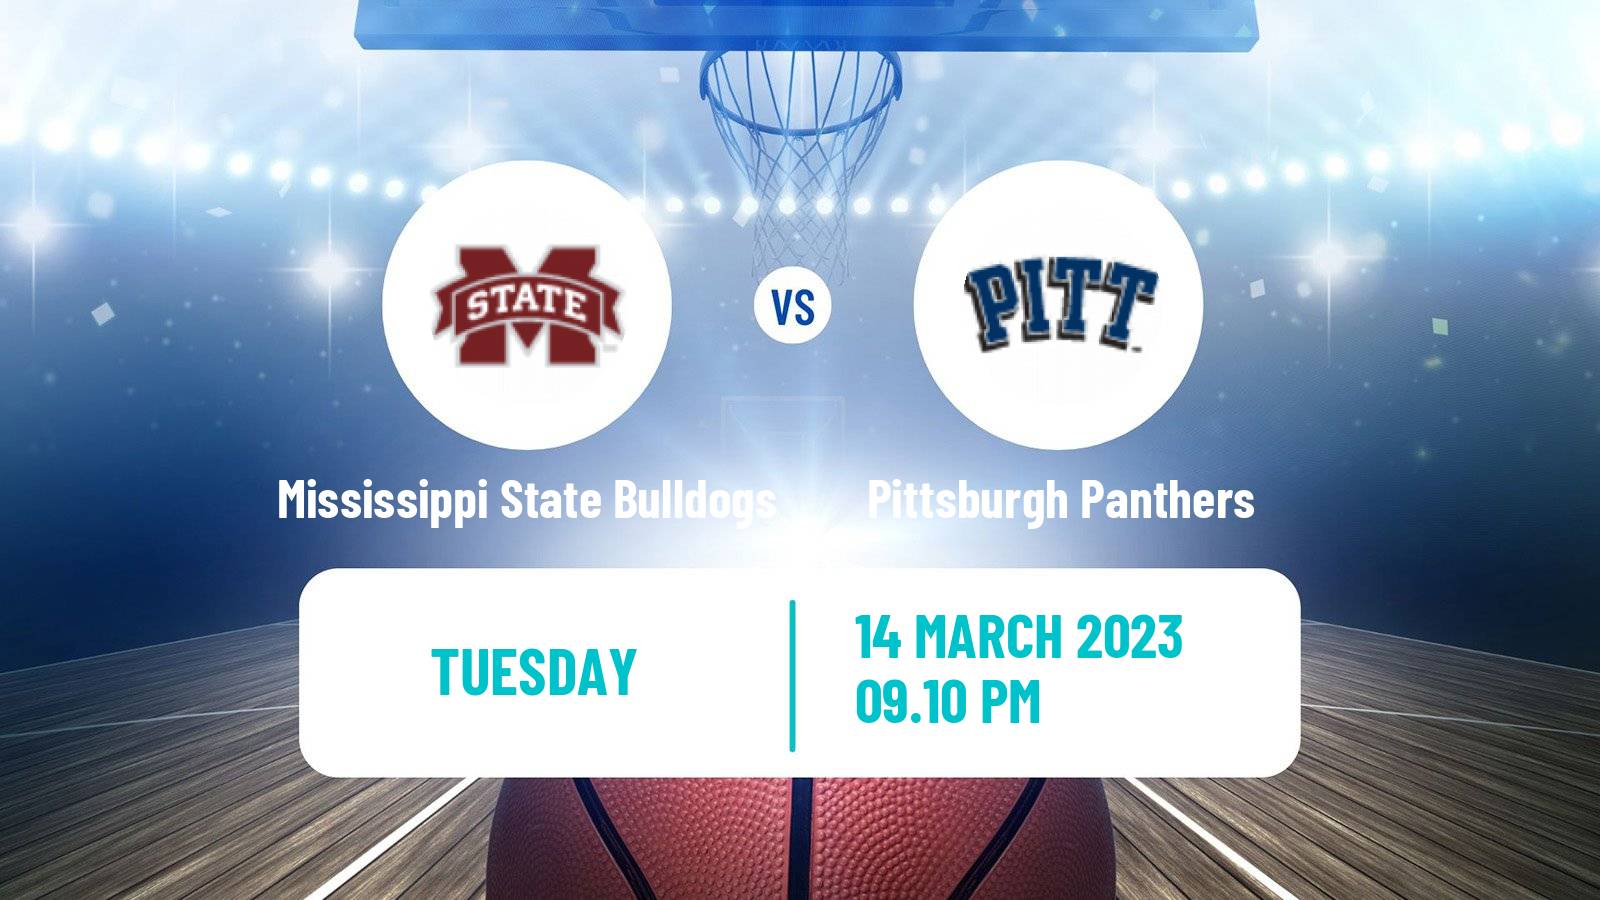 Basketball NCAA College Basketball Mississippi State Bulldogs - Pittsburgh Panthers